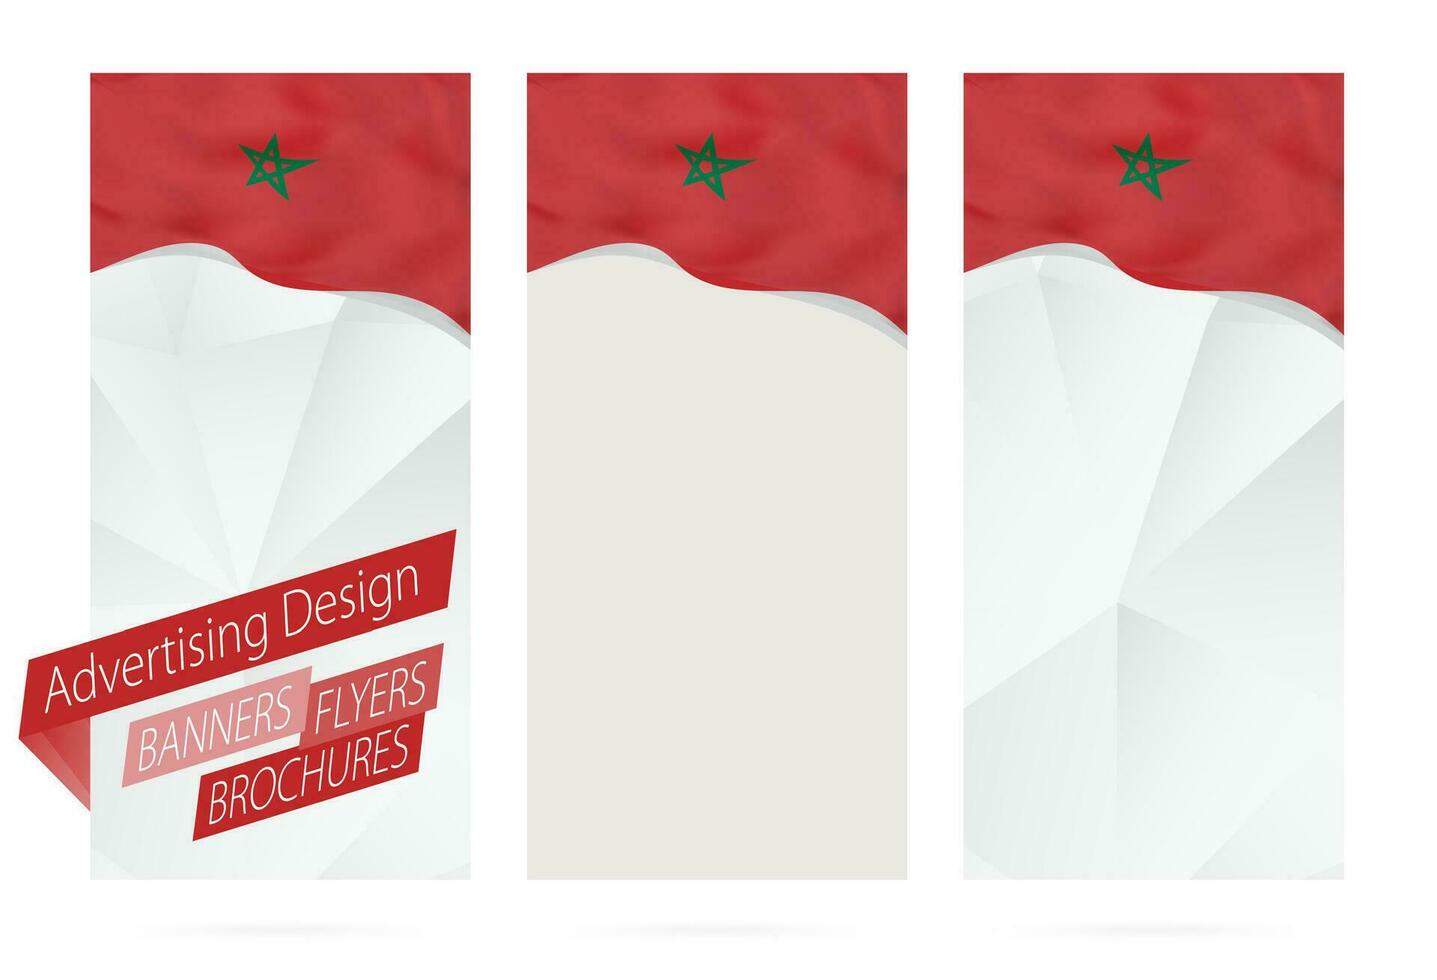 Design of banners, flyers, brochures with flag of Morocco. vector